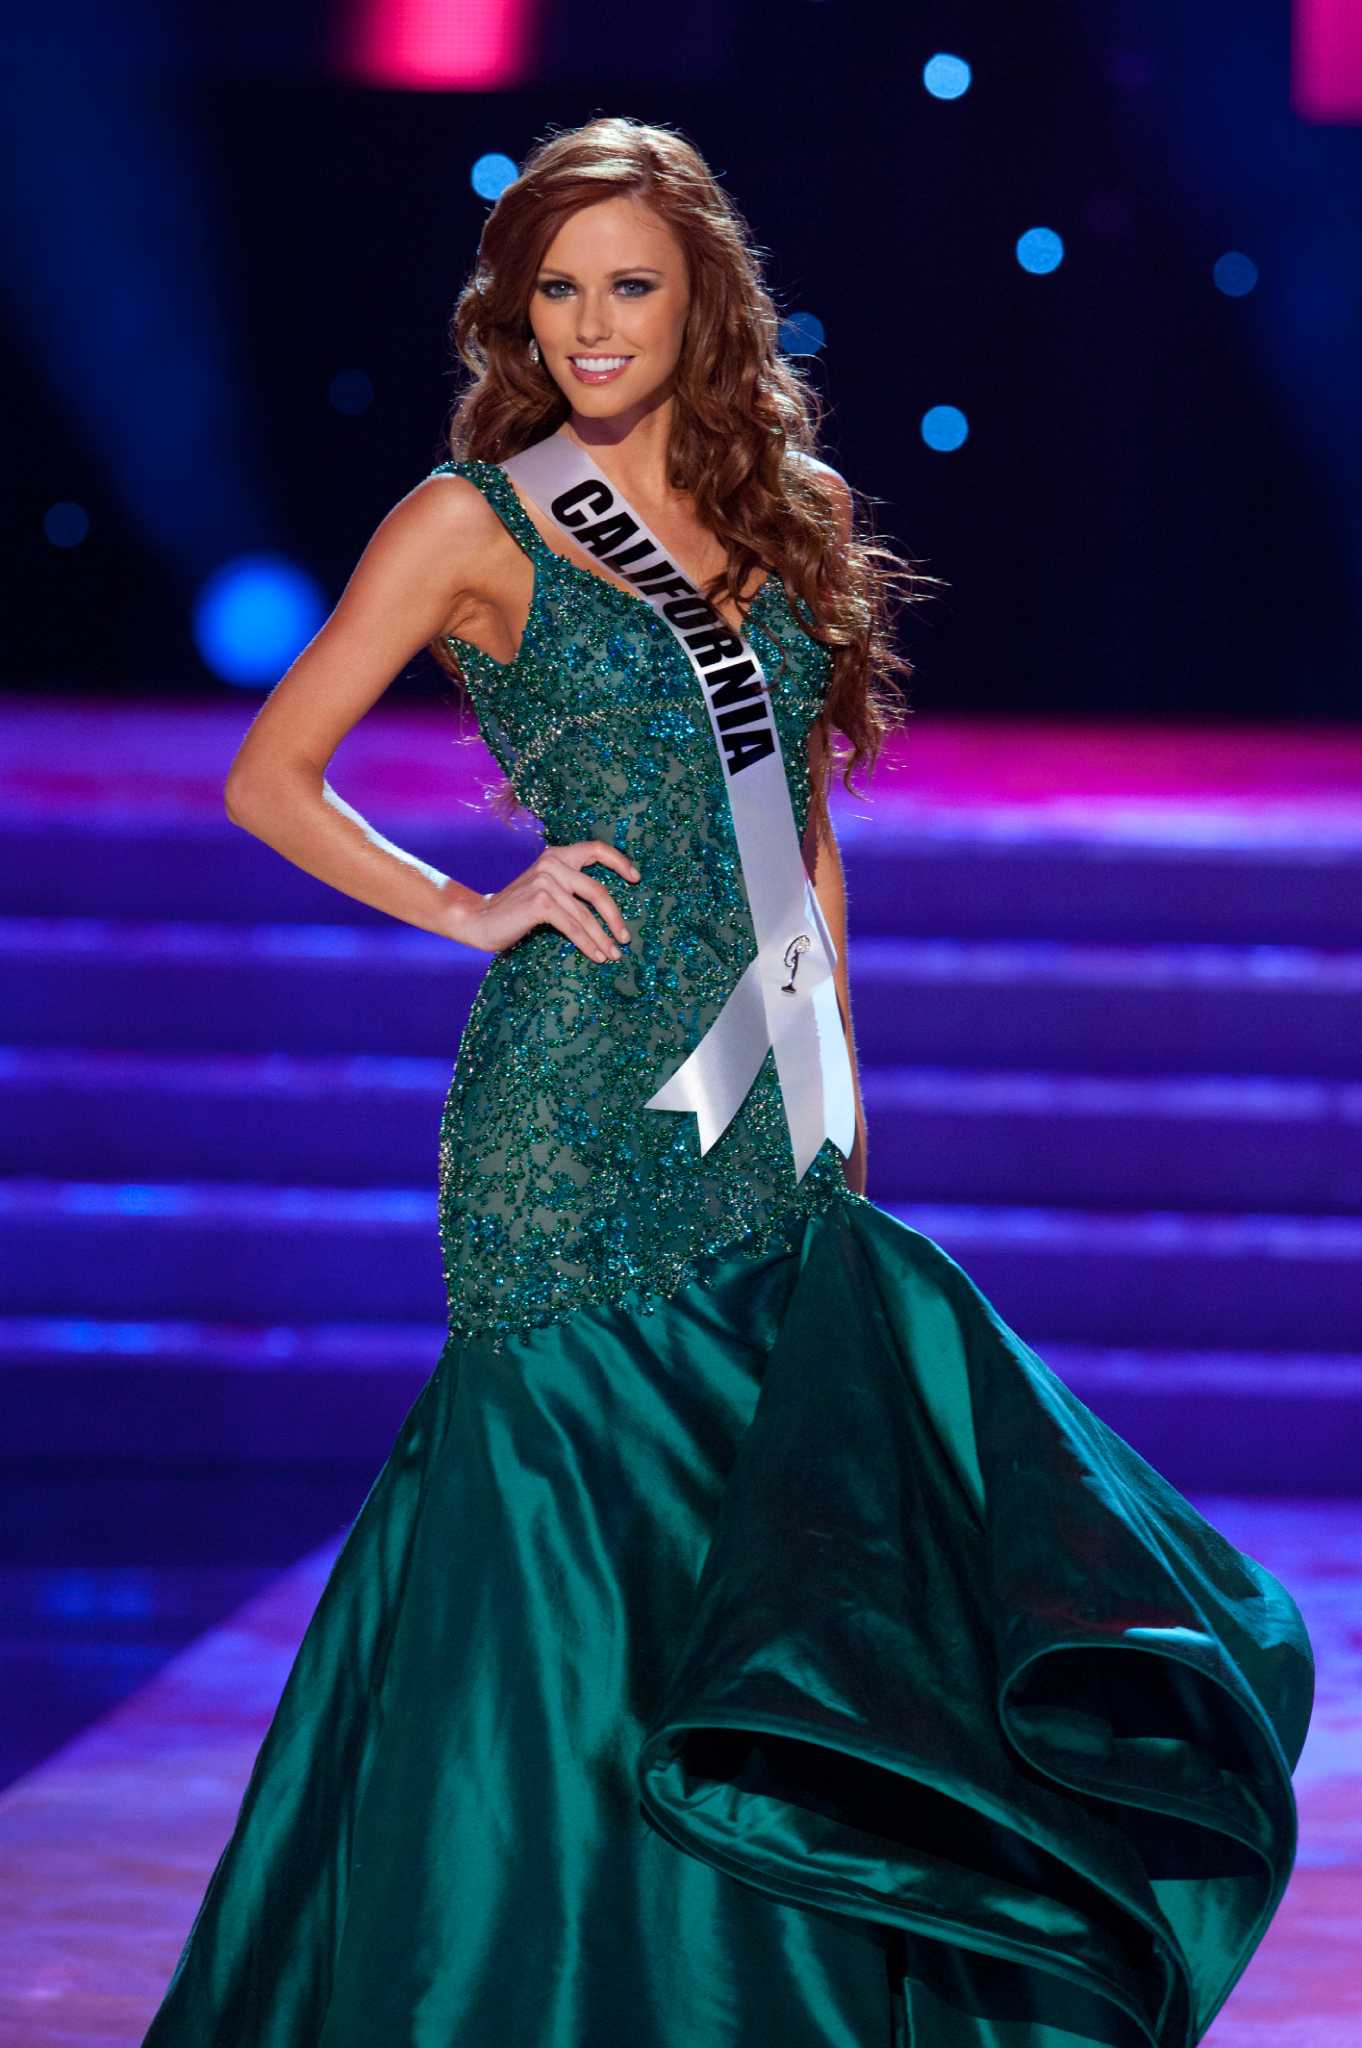 Local women to compete for Miss Texas USA